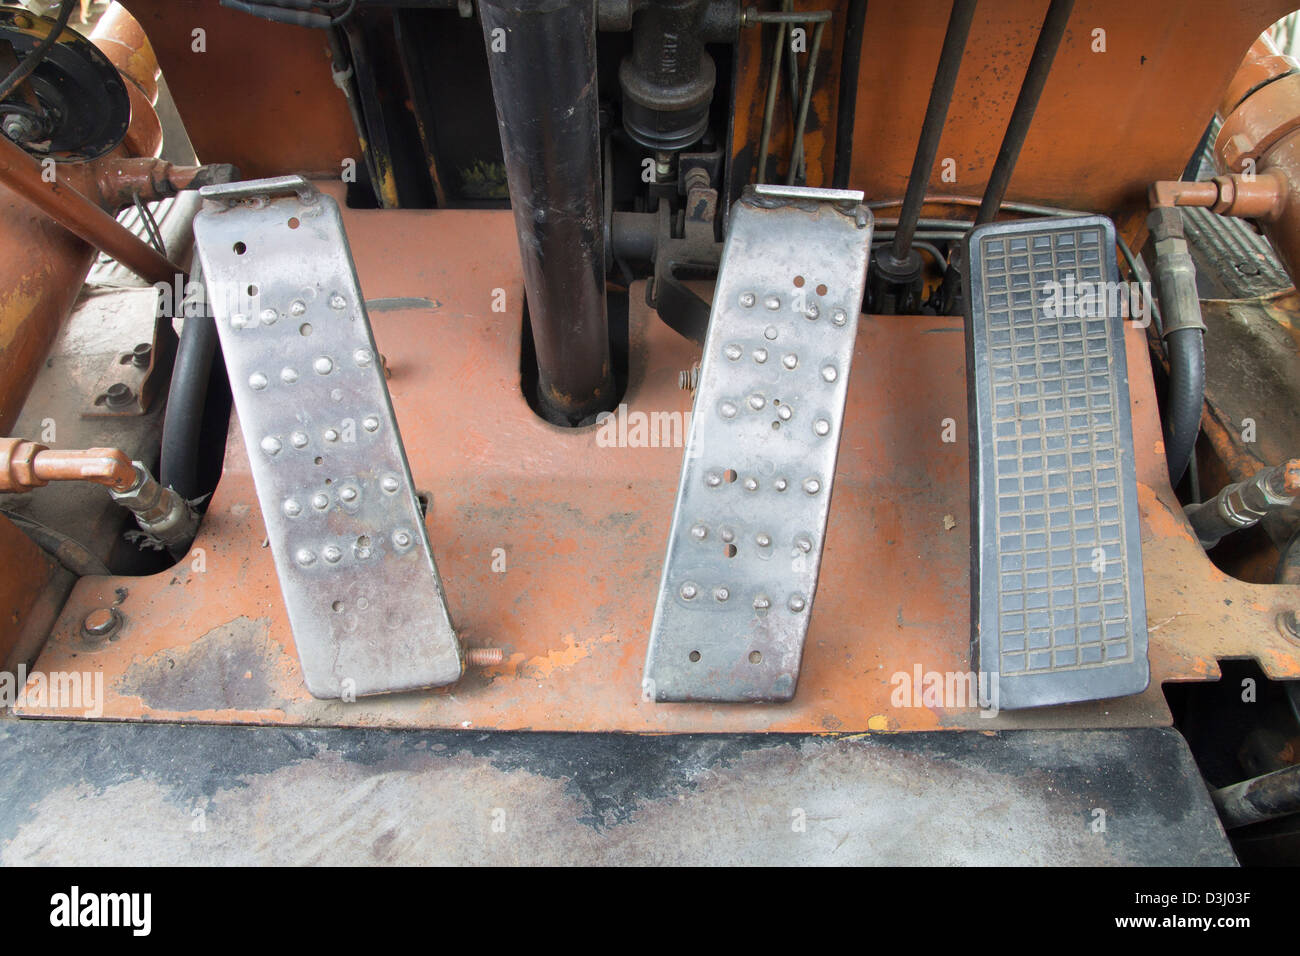 Brake pedal and accelerator forklift Stock Photo - Alamy